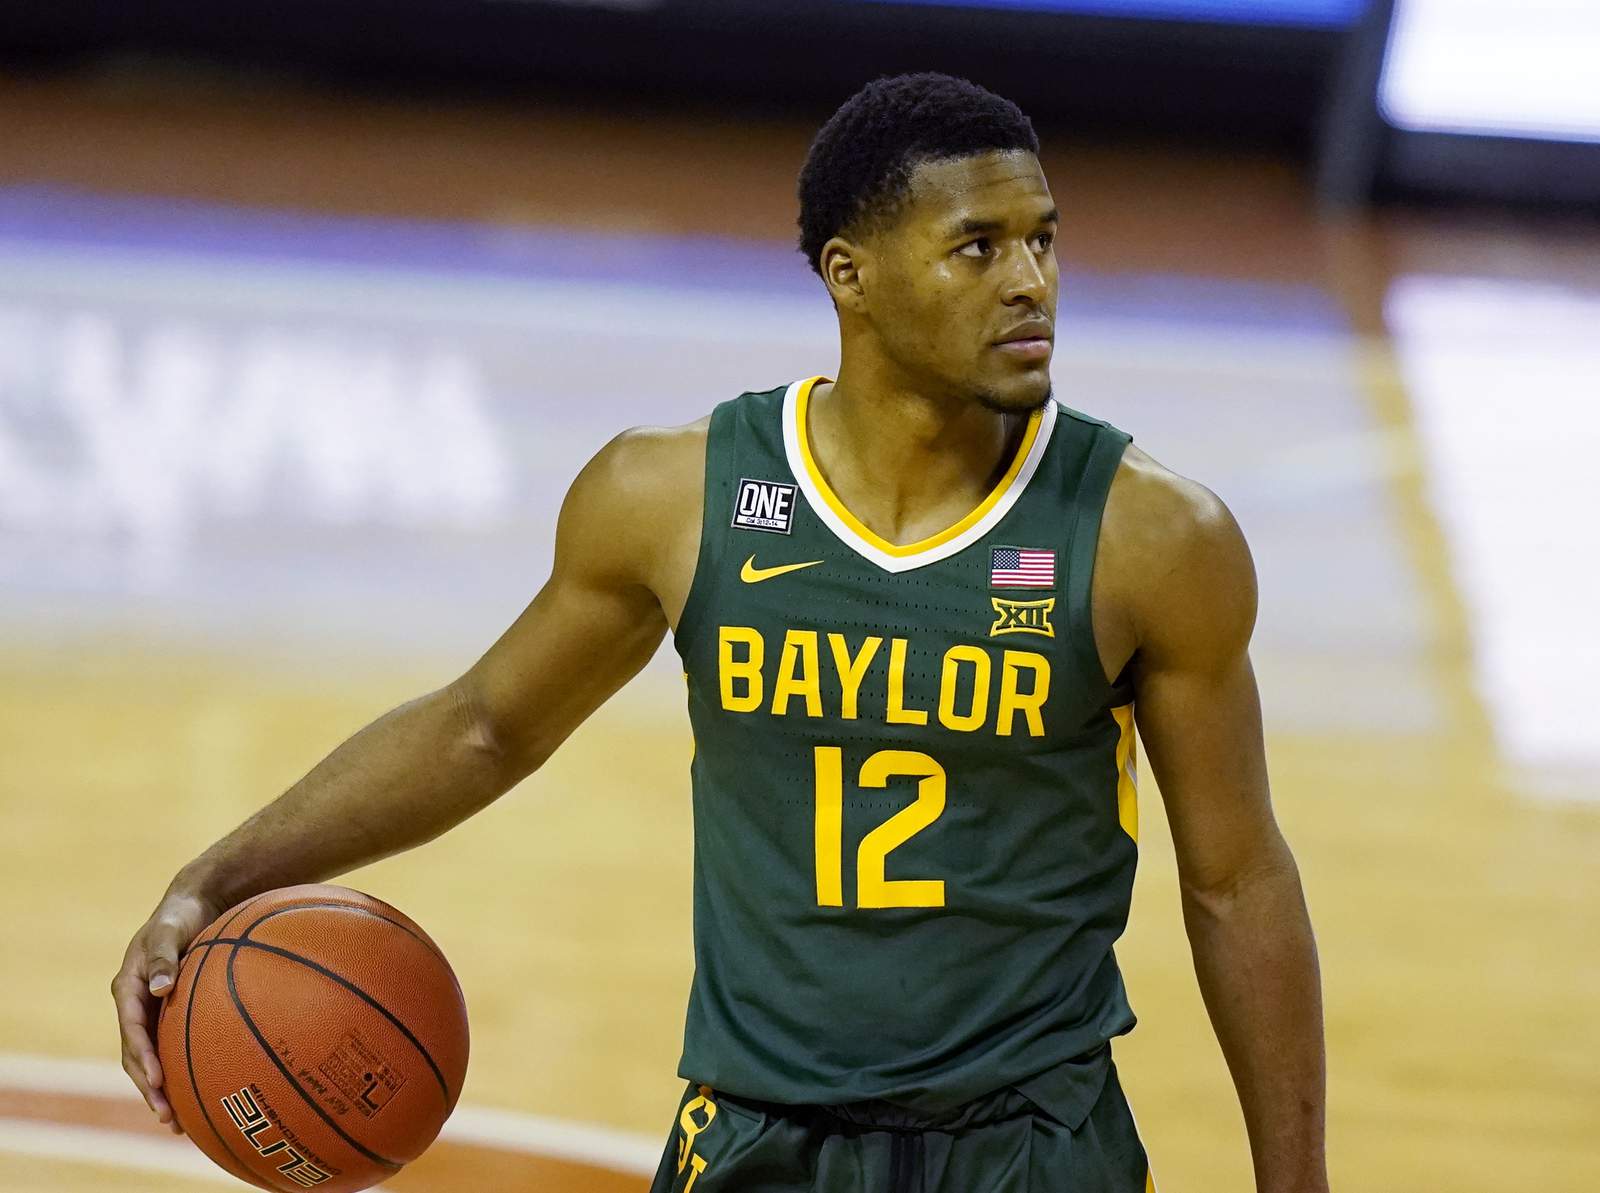 Unbeaten No. 2 Baylor back to play after 3-week COVID break